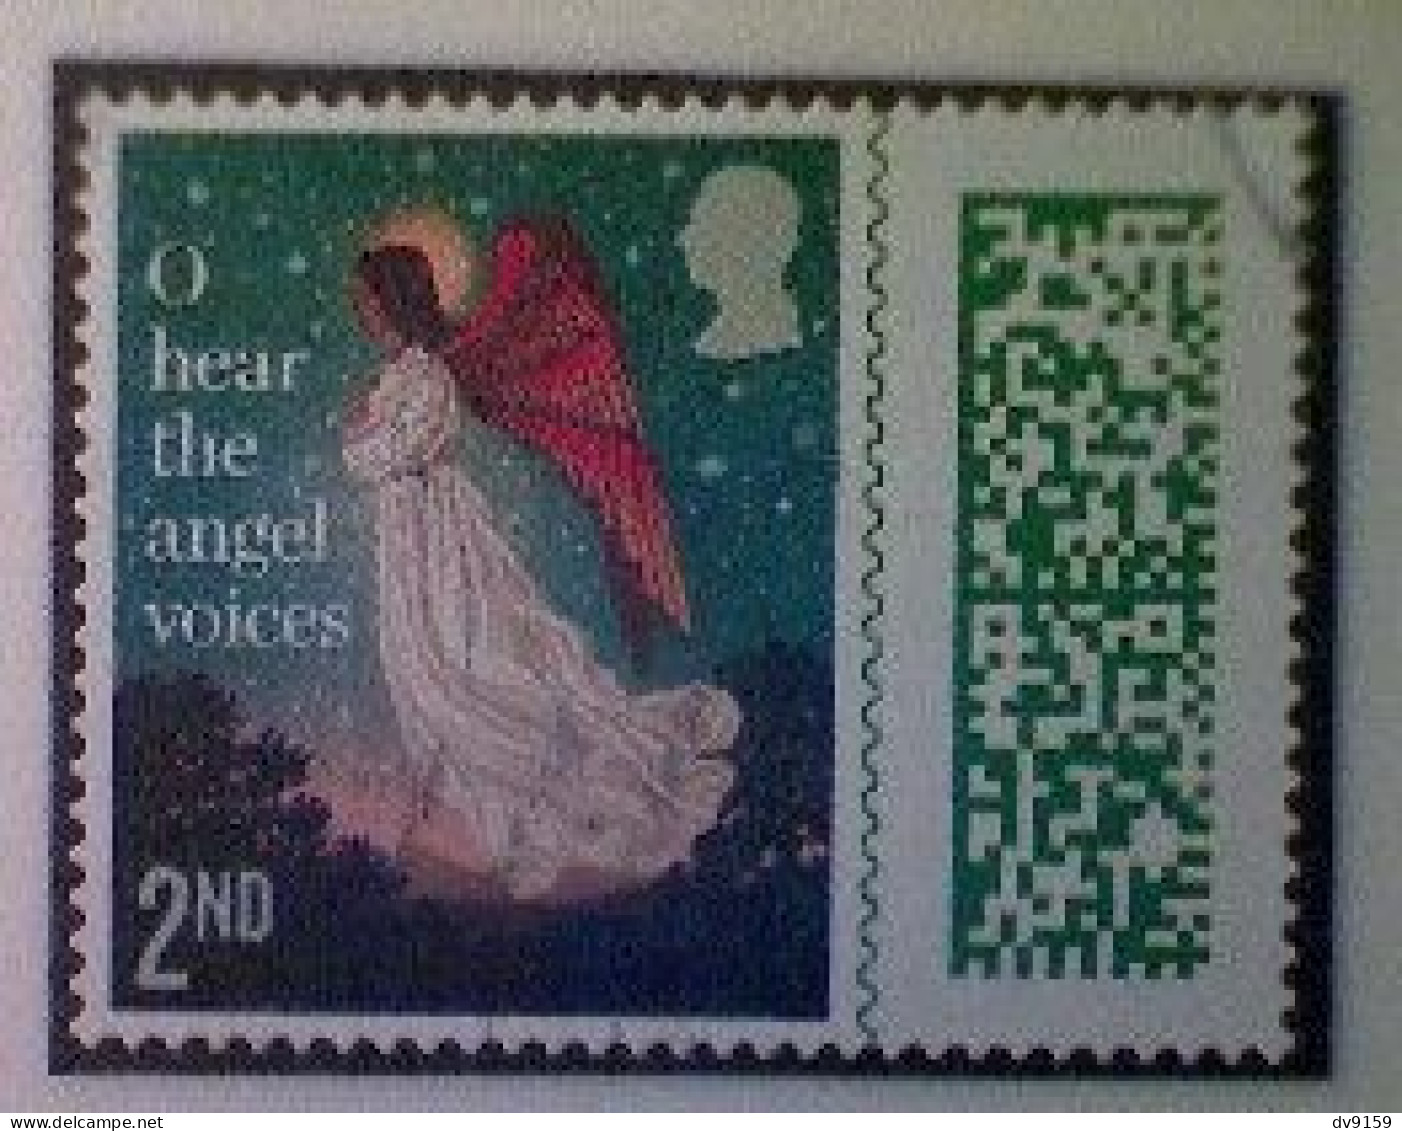 Great Britain, Scott #4443, Used(o), 2023, Traditional Christmas, 2nd, Multicolored - Used Stamps